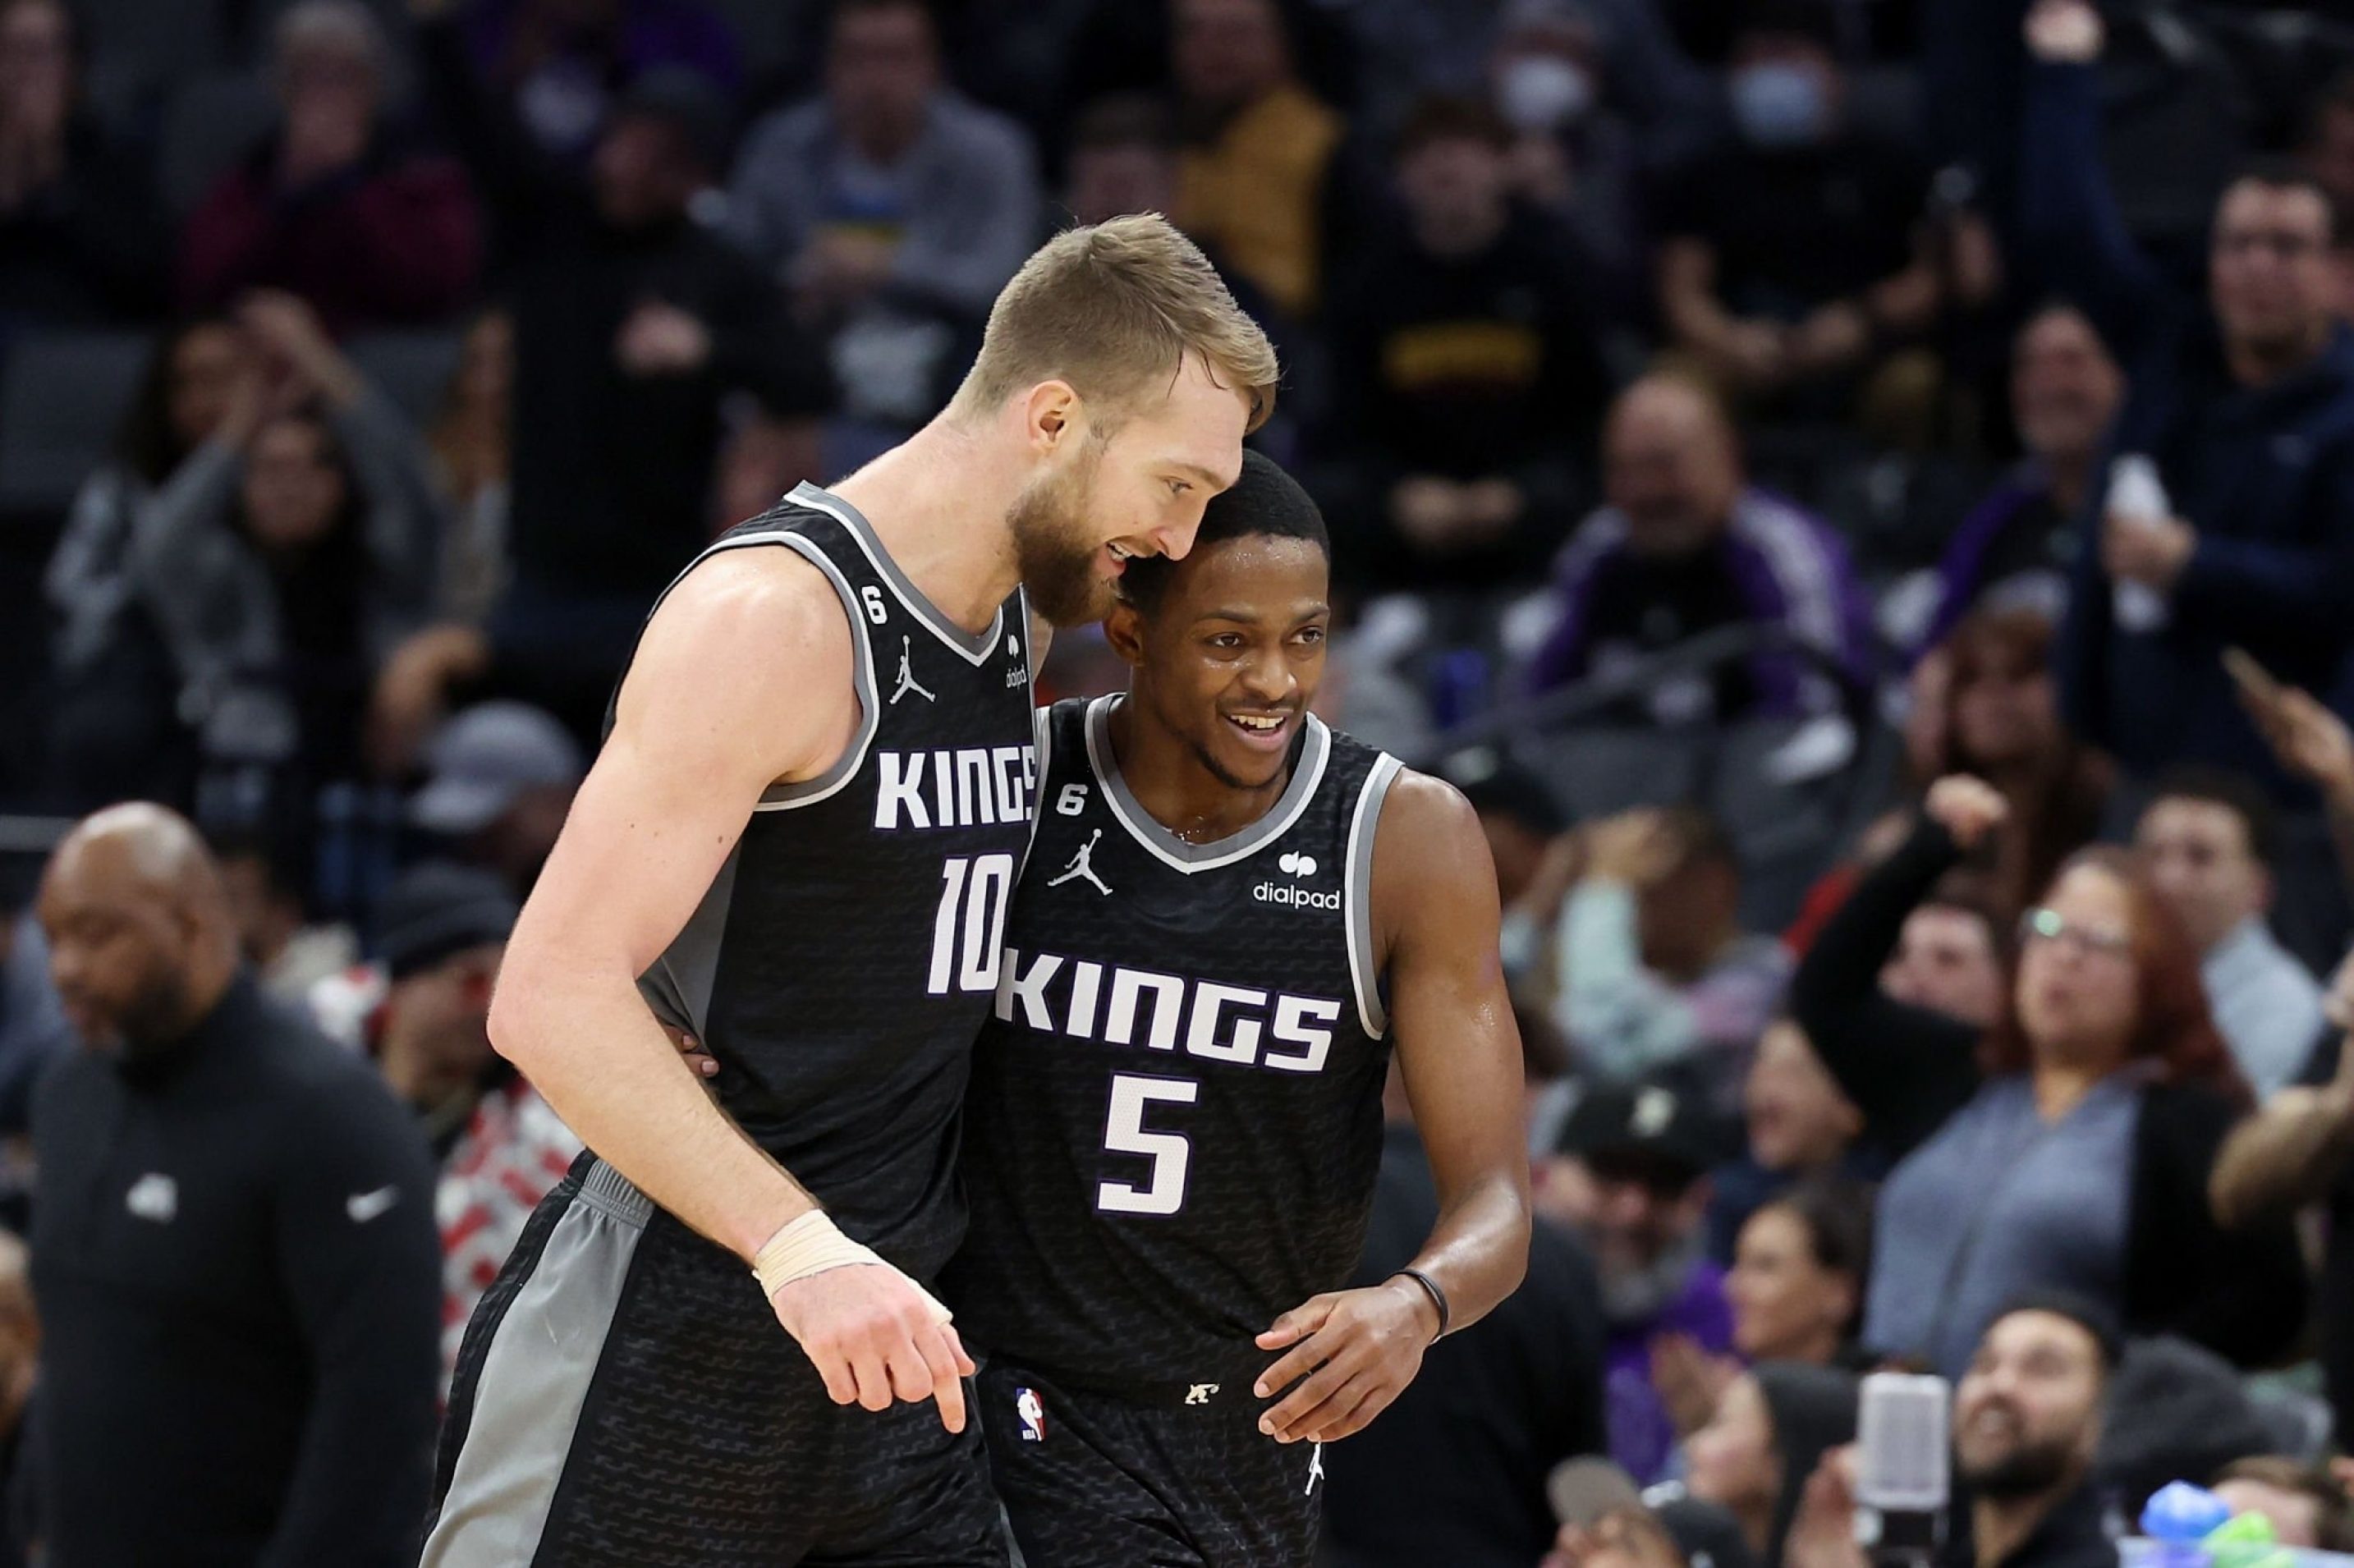 SACRAMENTO, CALIFORNIA - JANUARY 11: Domantas Sabonis #10 and De'Aaron Fox #5 of the Sacramento Kings react after Trey Lyles #41 made a three-point basket against the Houston Rockets in the second half at Golden 1 Center on January 11, 2023 in Sacramento, California.